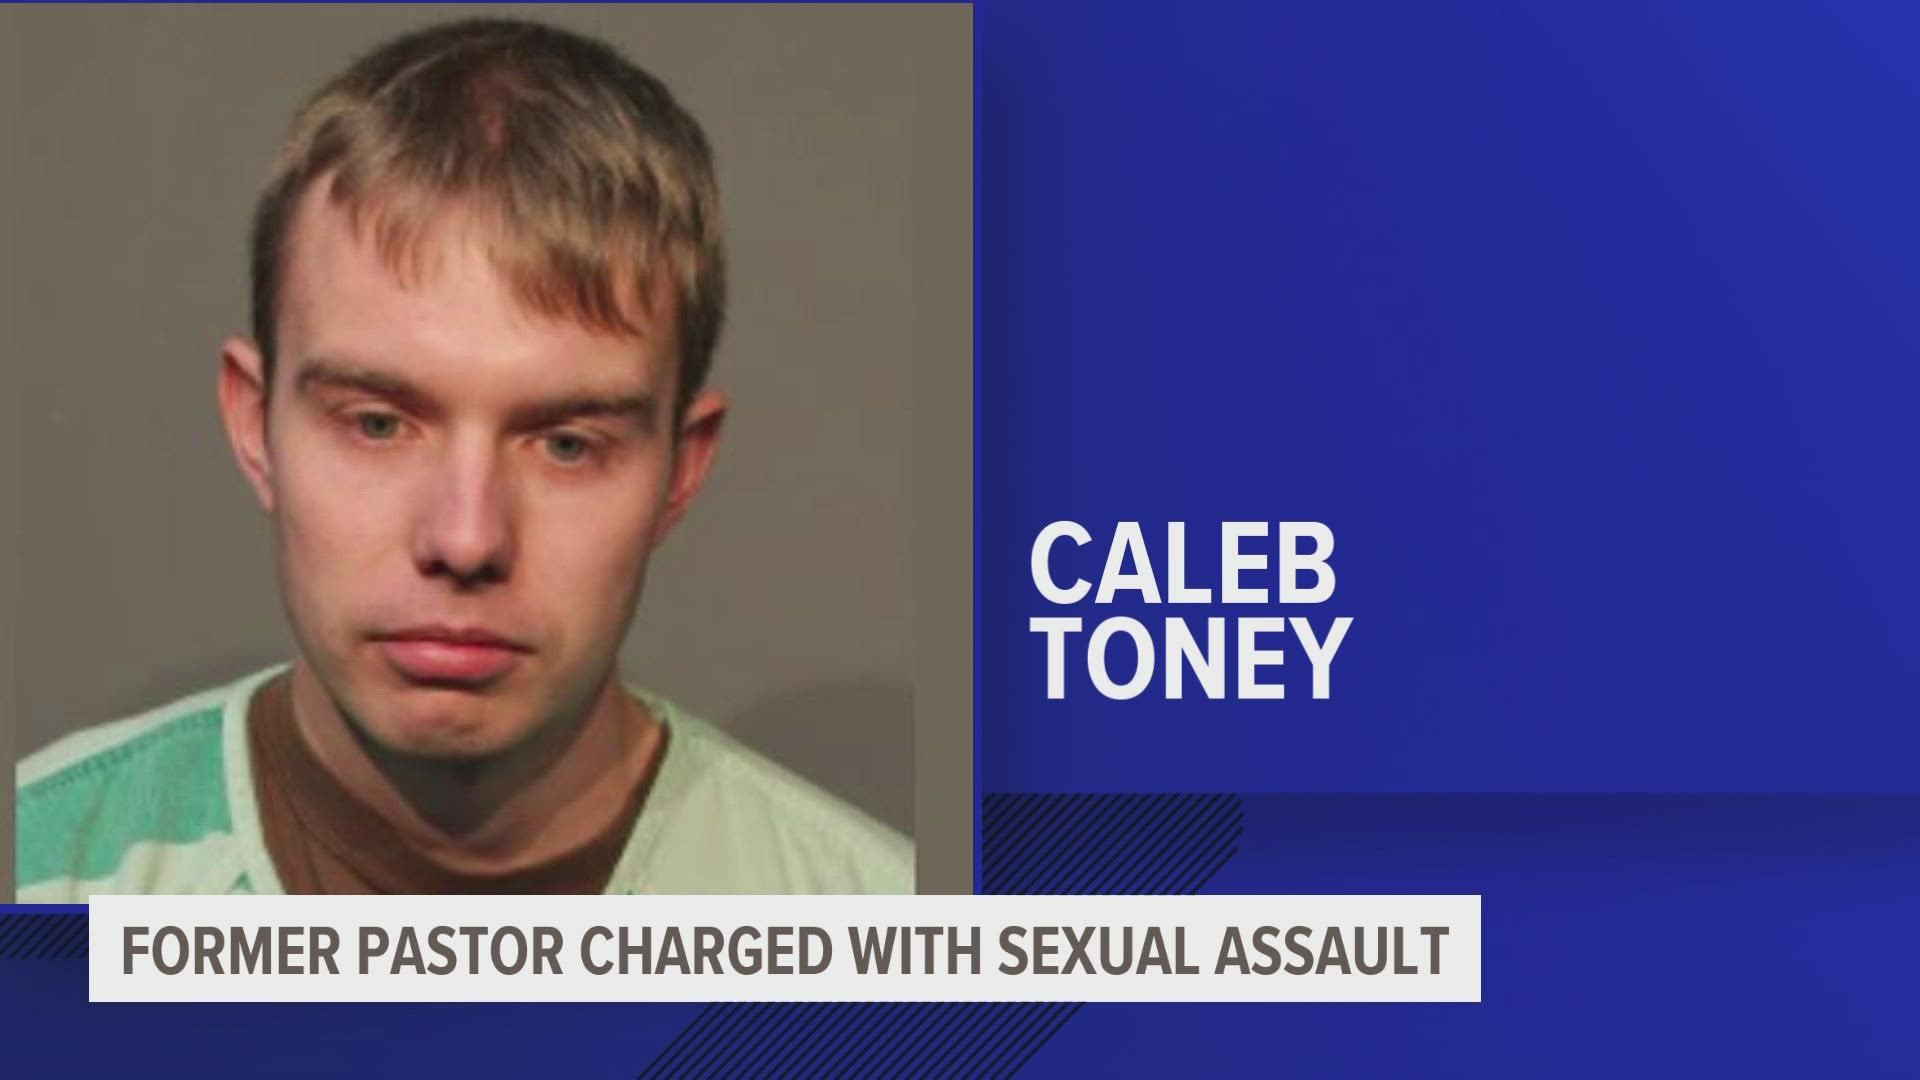 A former pastor from Elkart is being charged with sexual assault by the state of Iowa for incidents that occurred sometime between early 2019 and mid- 2020.